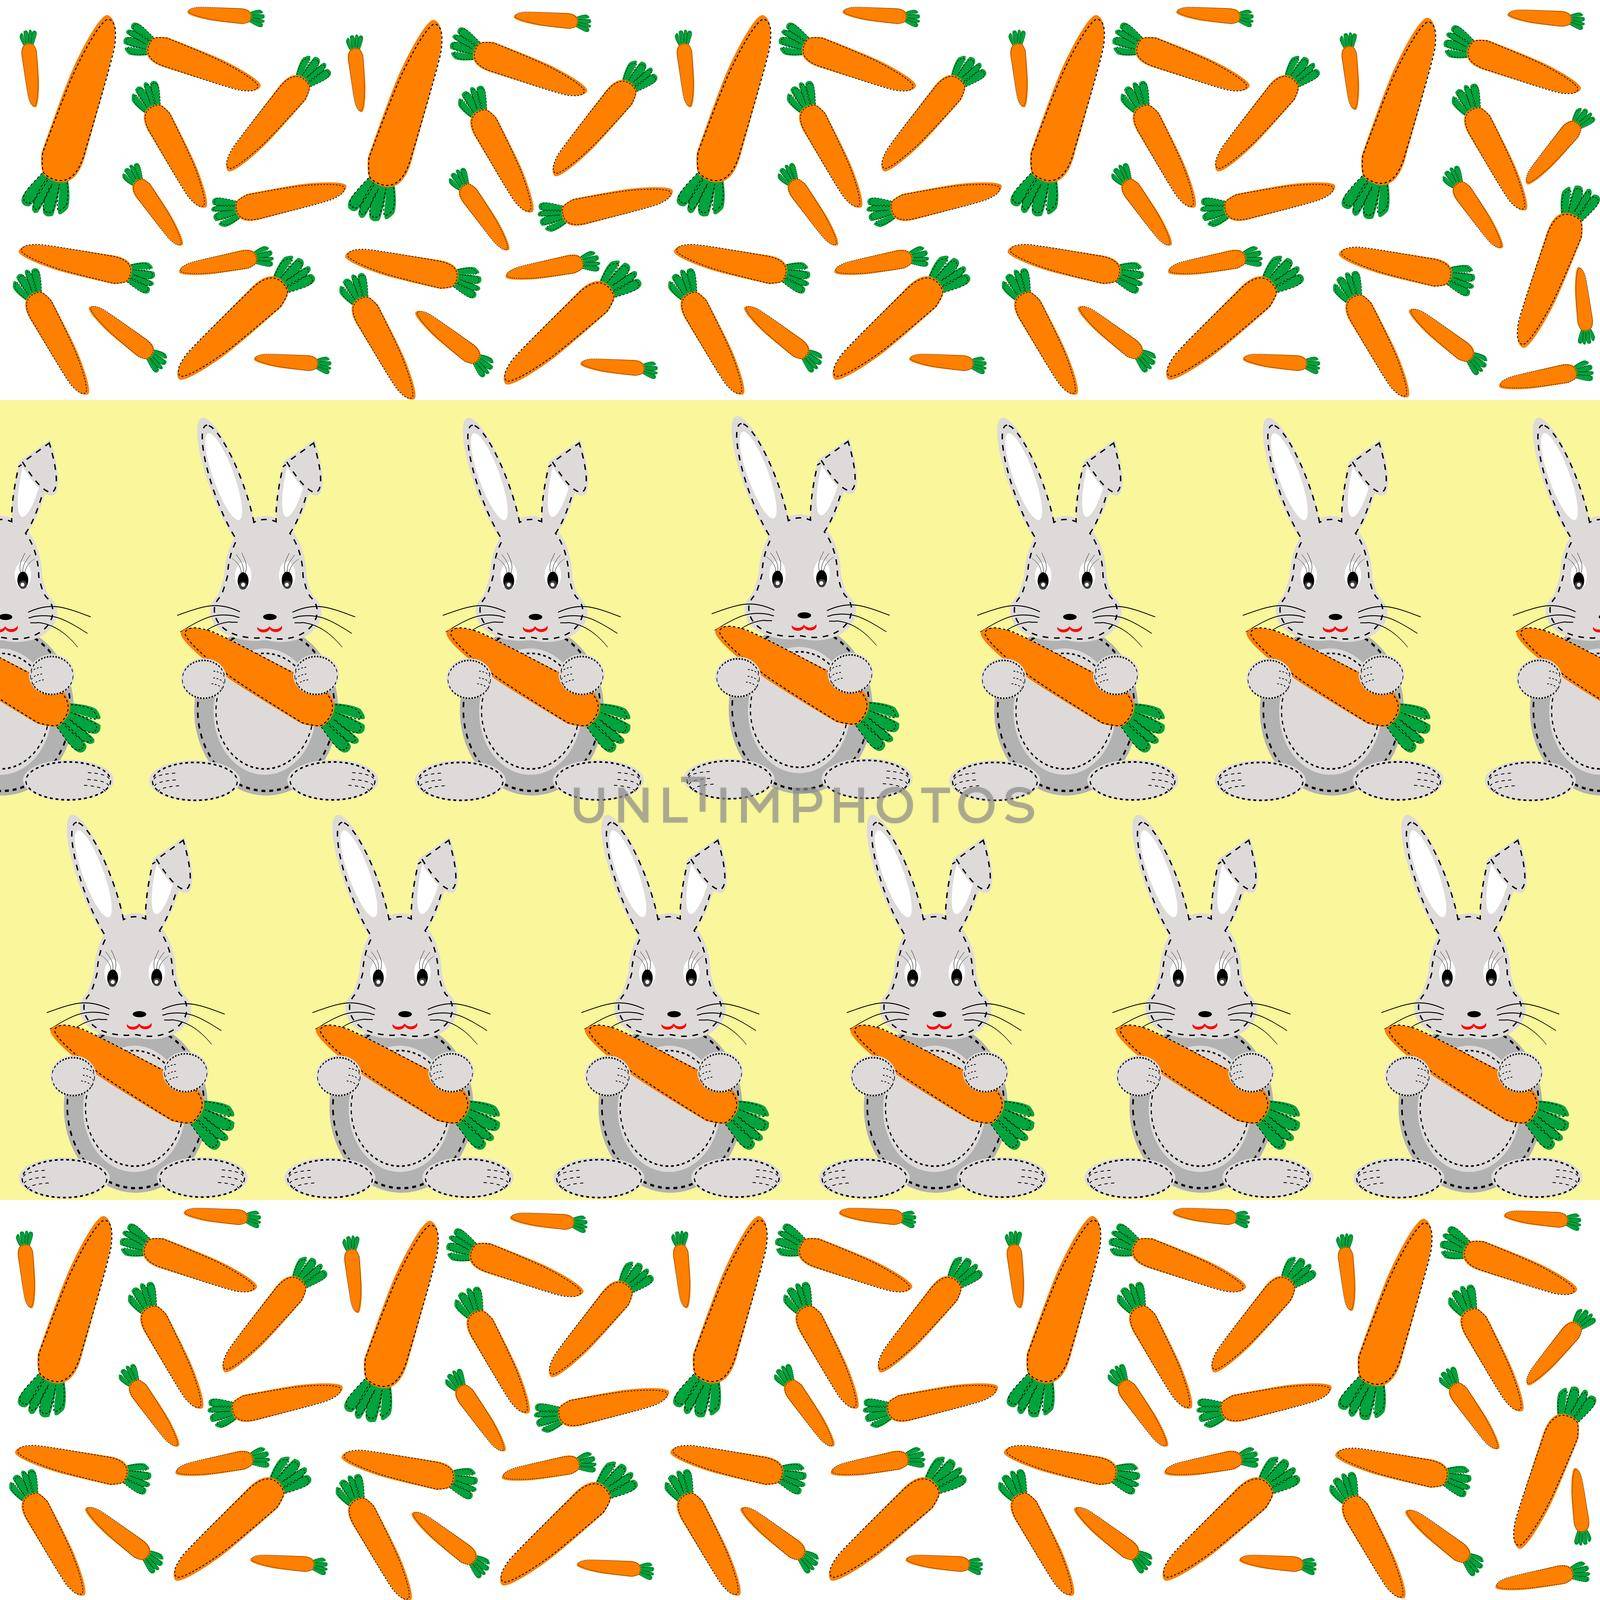 Rabbits and carrots seamless pattern on yellow background by hibrida13